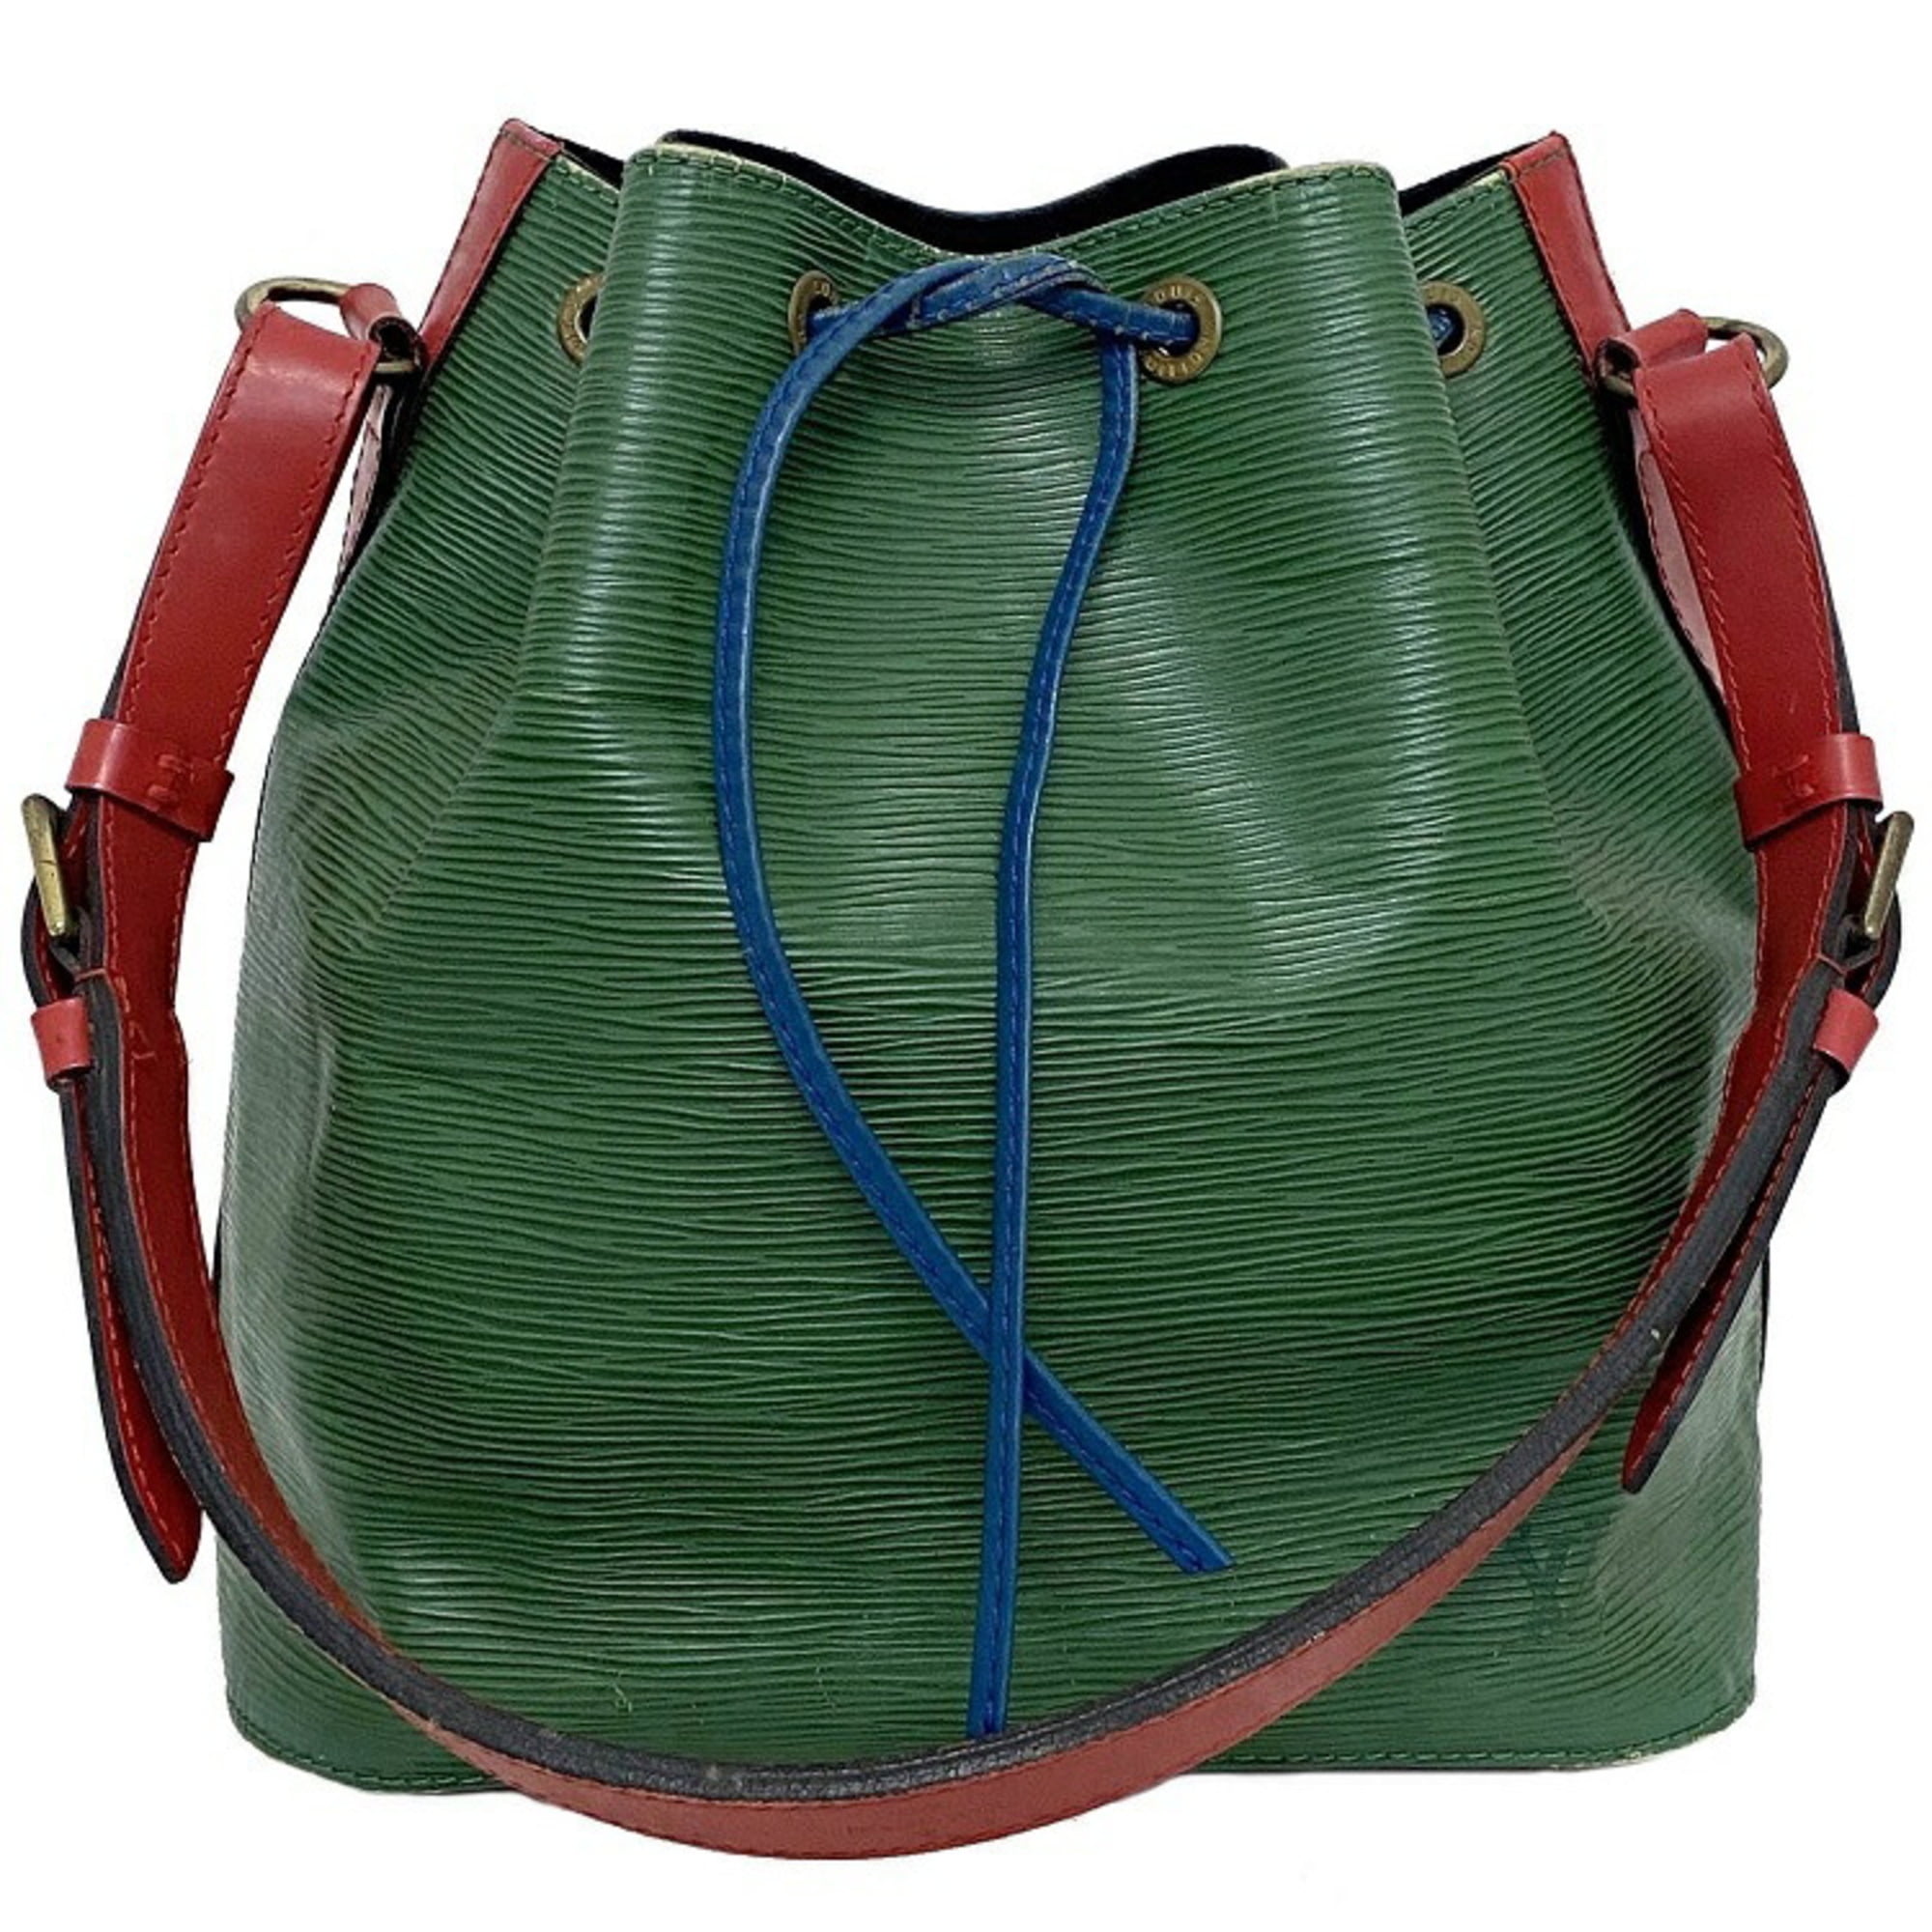 Authenticated Used Louis Vuitton Drawstring Bag Petit Noe Green Red Blue  M44147 Shoulder Leather A20953 LOUIS VUITTON Bicolor String Women's Men's  Accent 